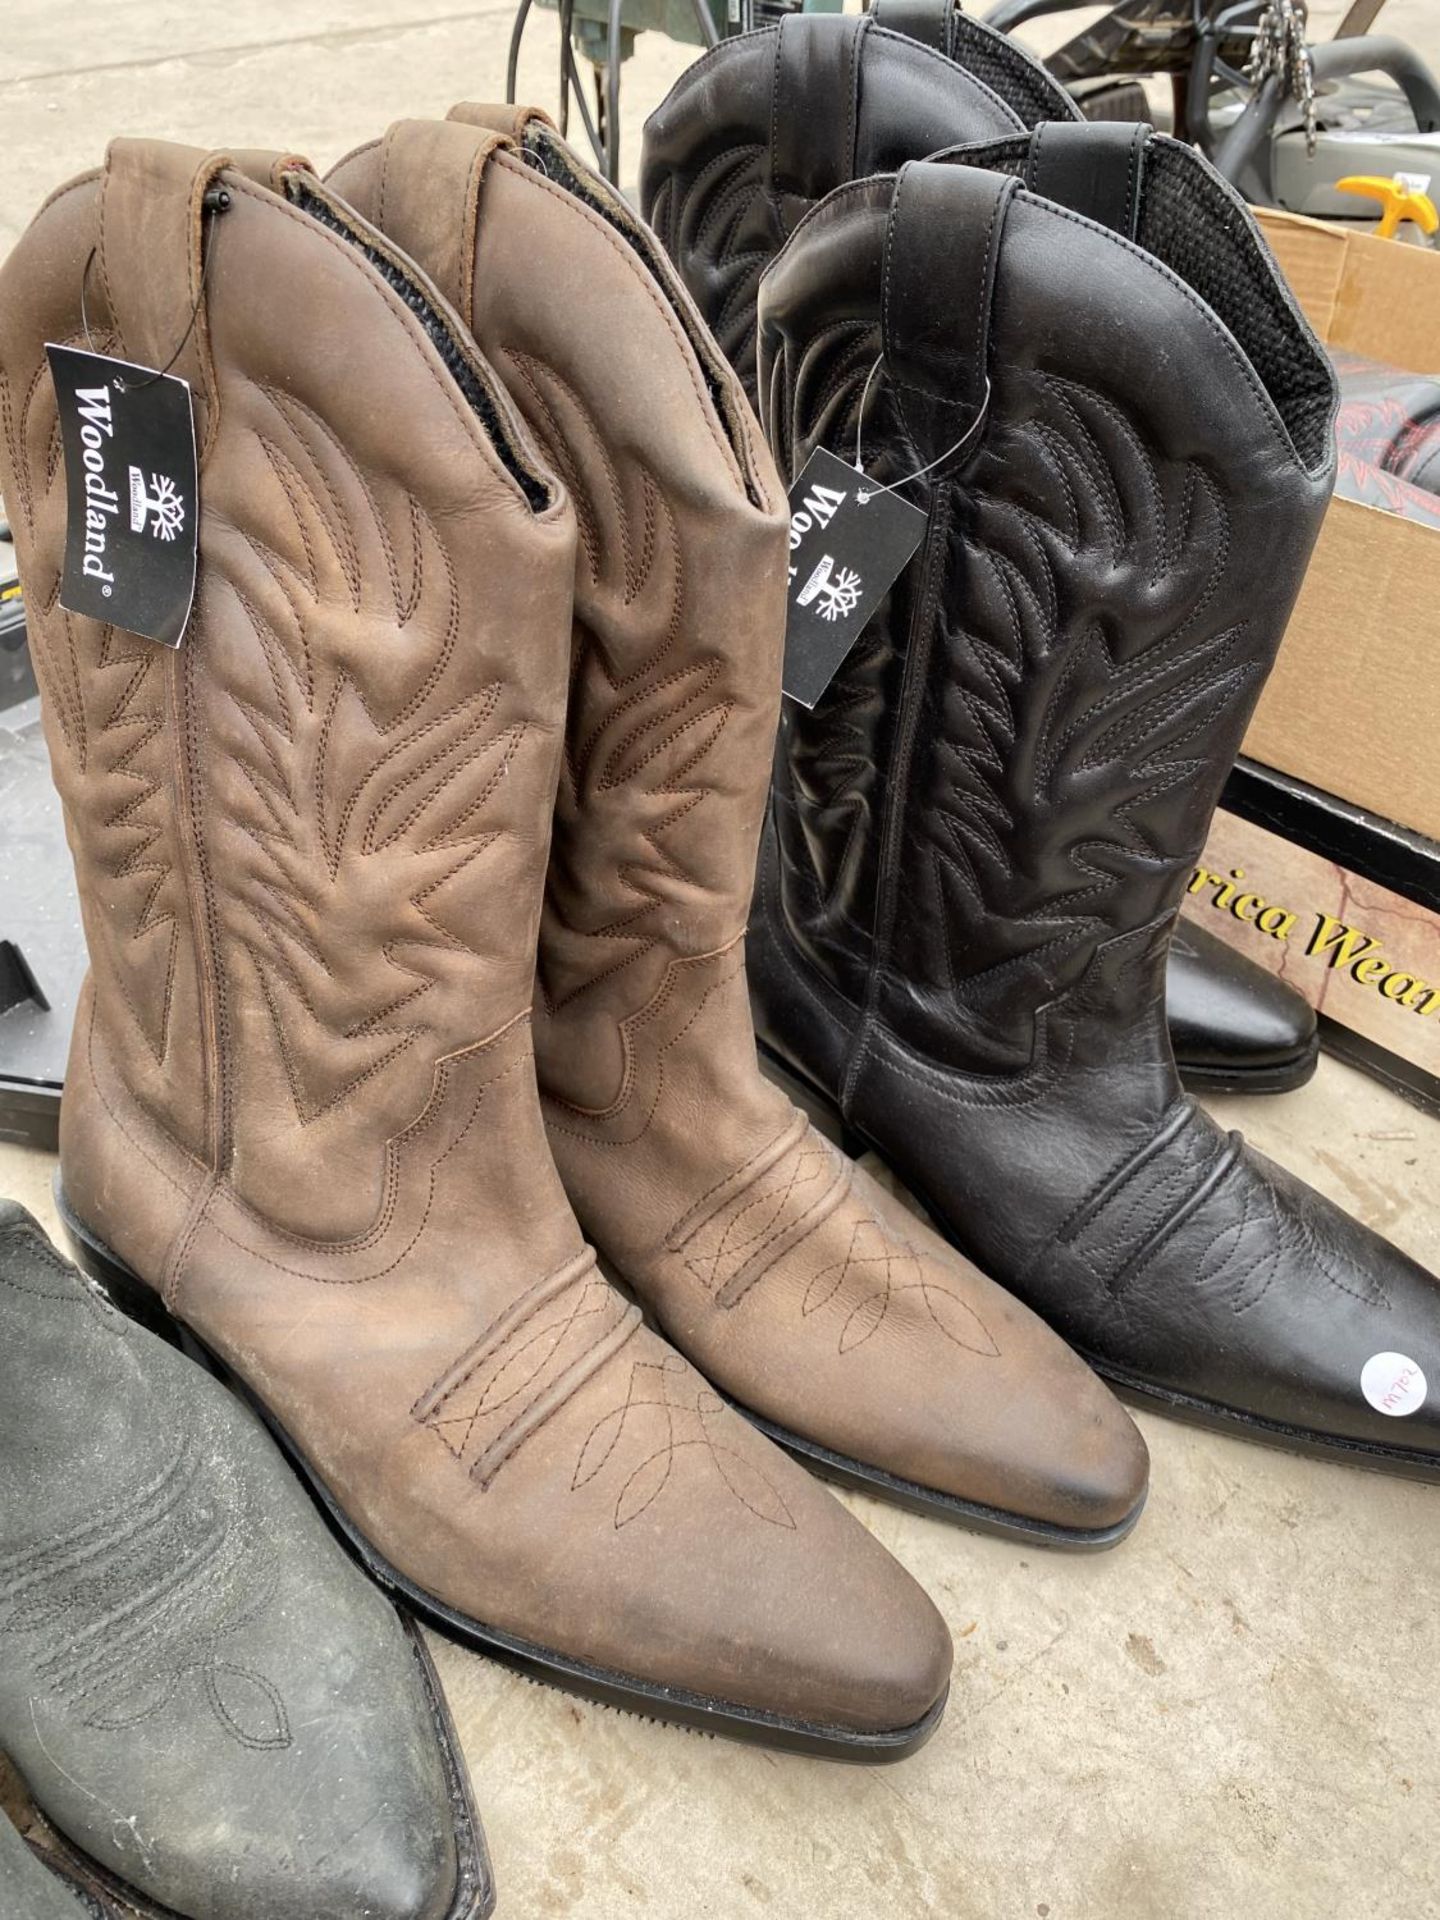 A LARGE COLLECTION OF GENTS COWBOY BOOTS FROM SIZE 10.5-12 - Image 3 of 5